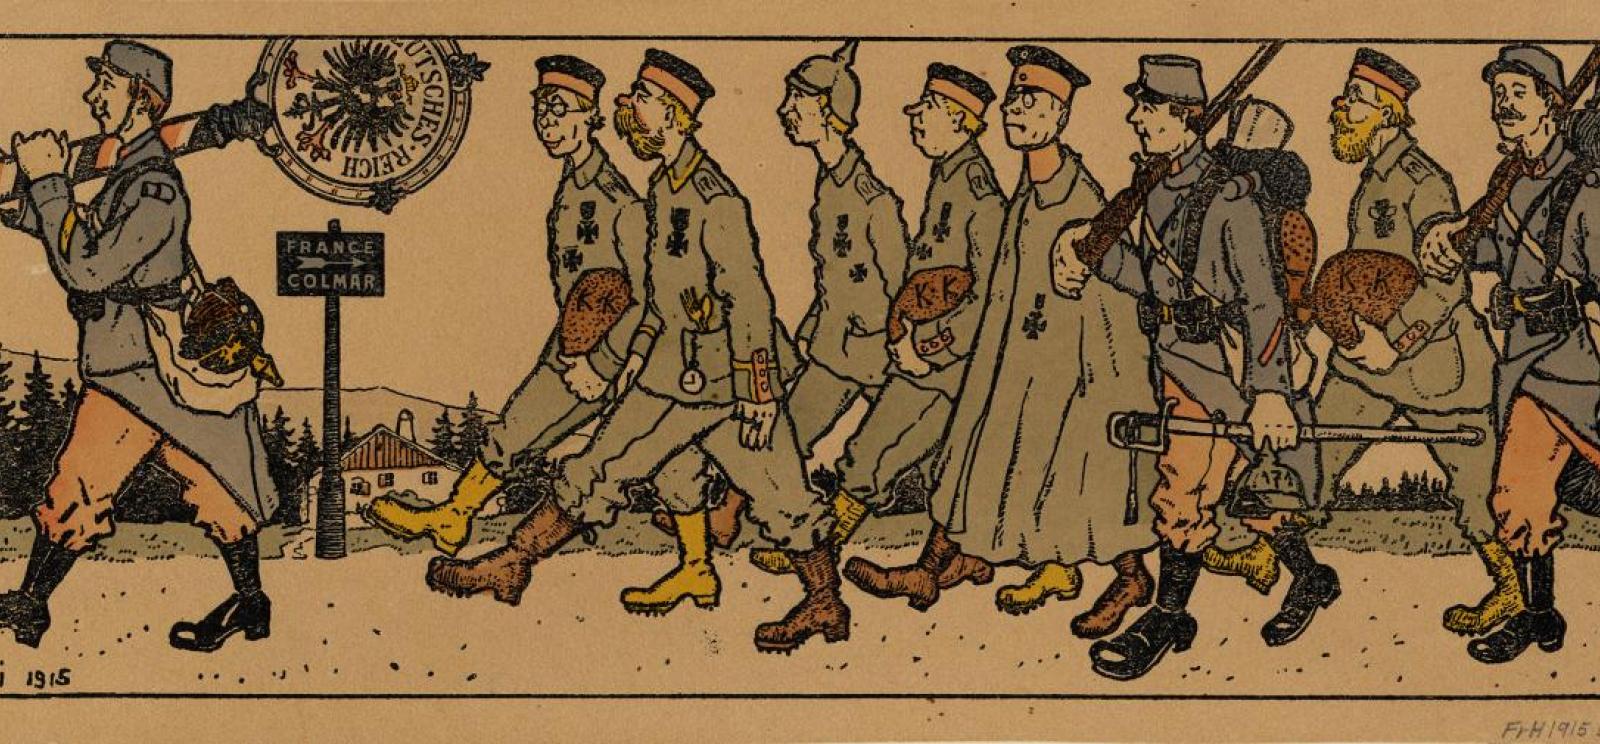 Cartoon of a French soldier leading German prisoners of war along a path.